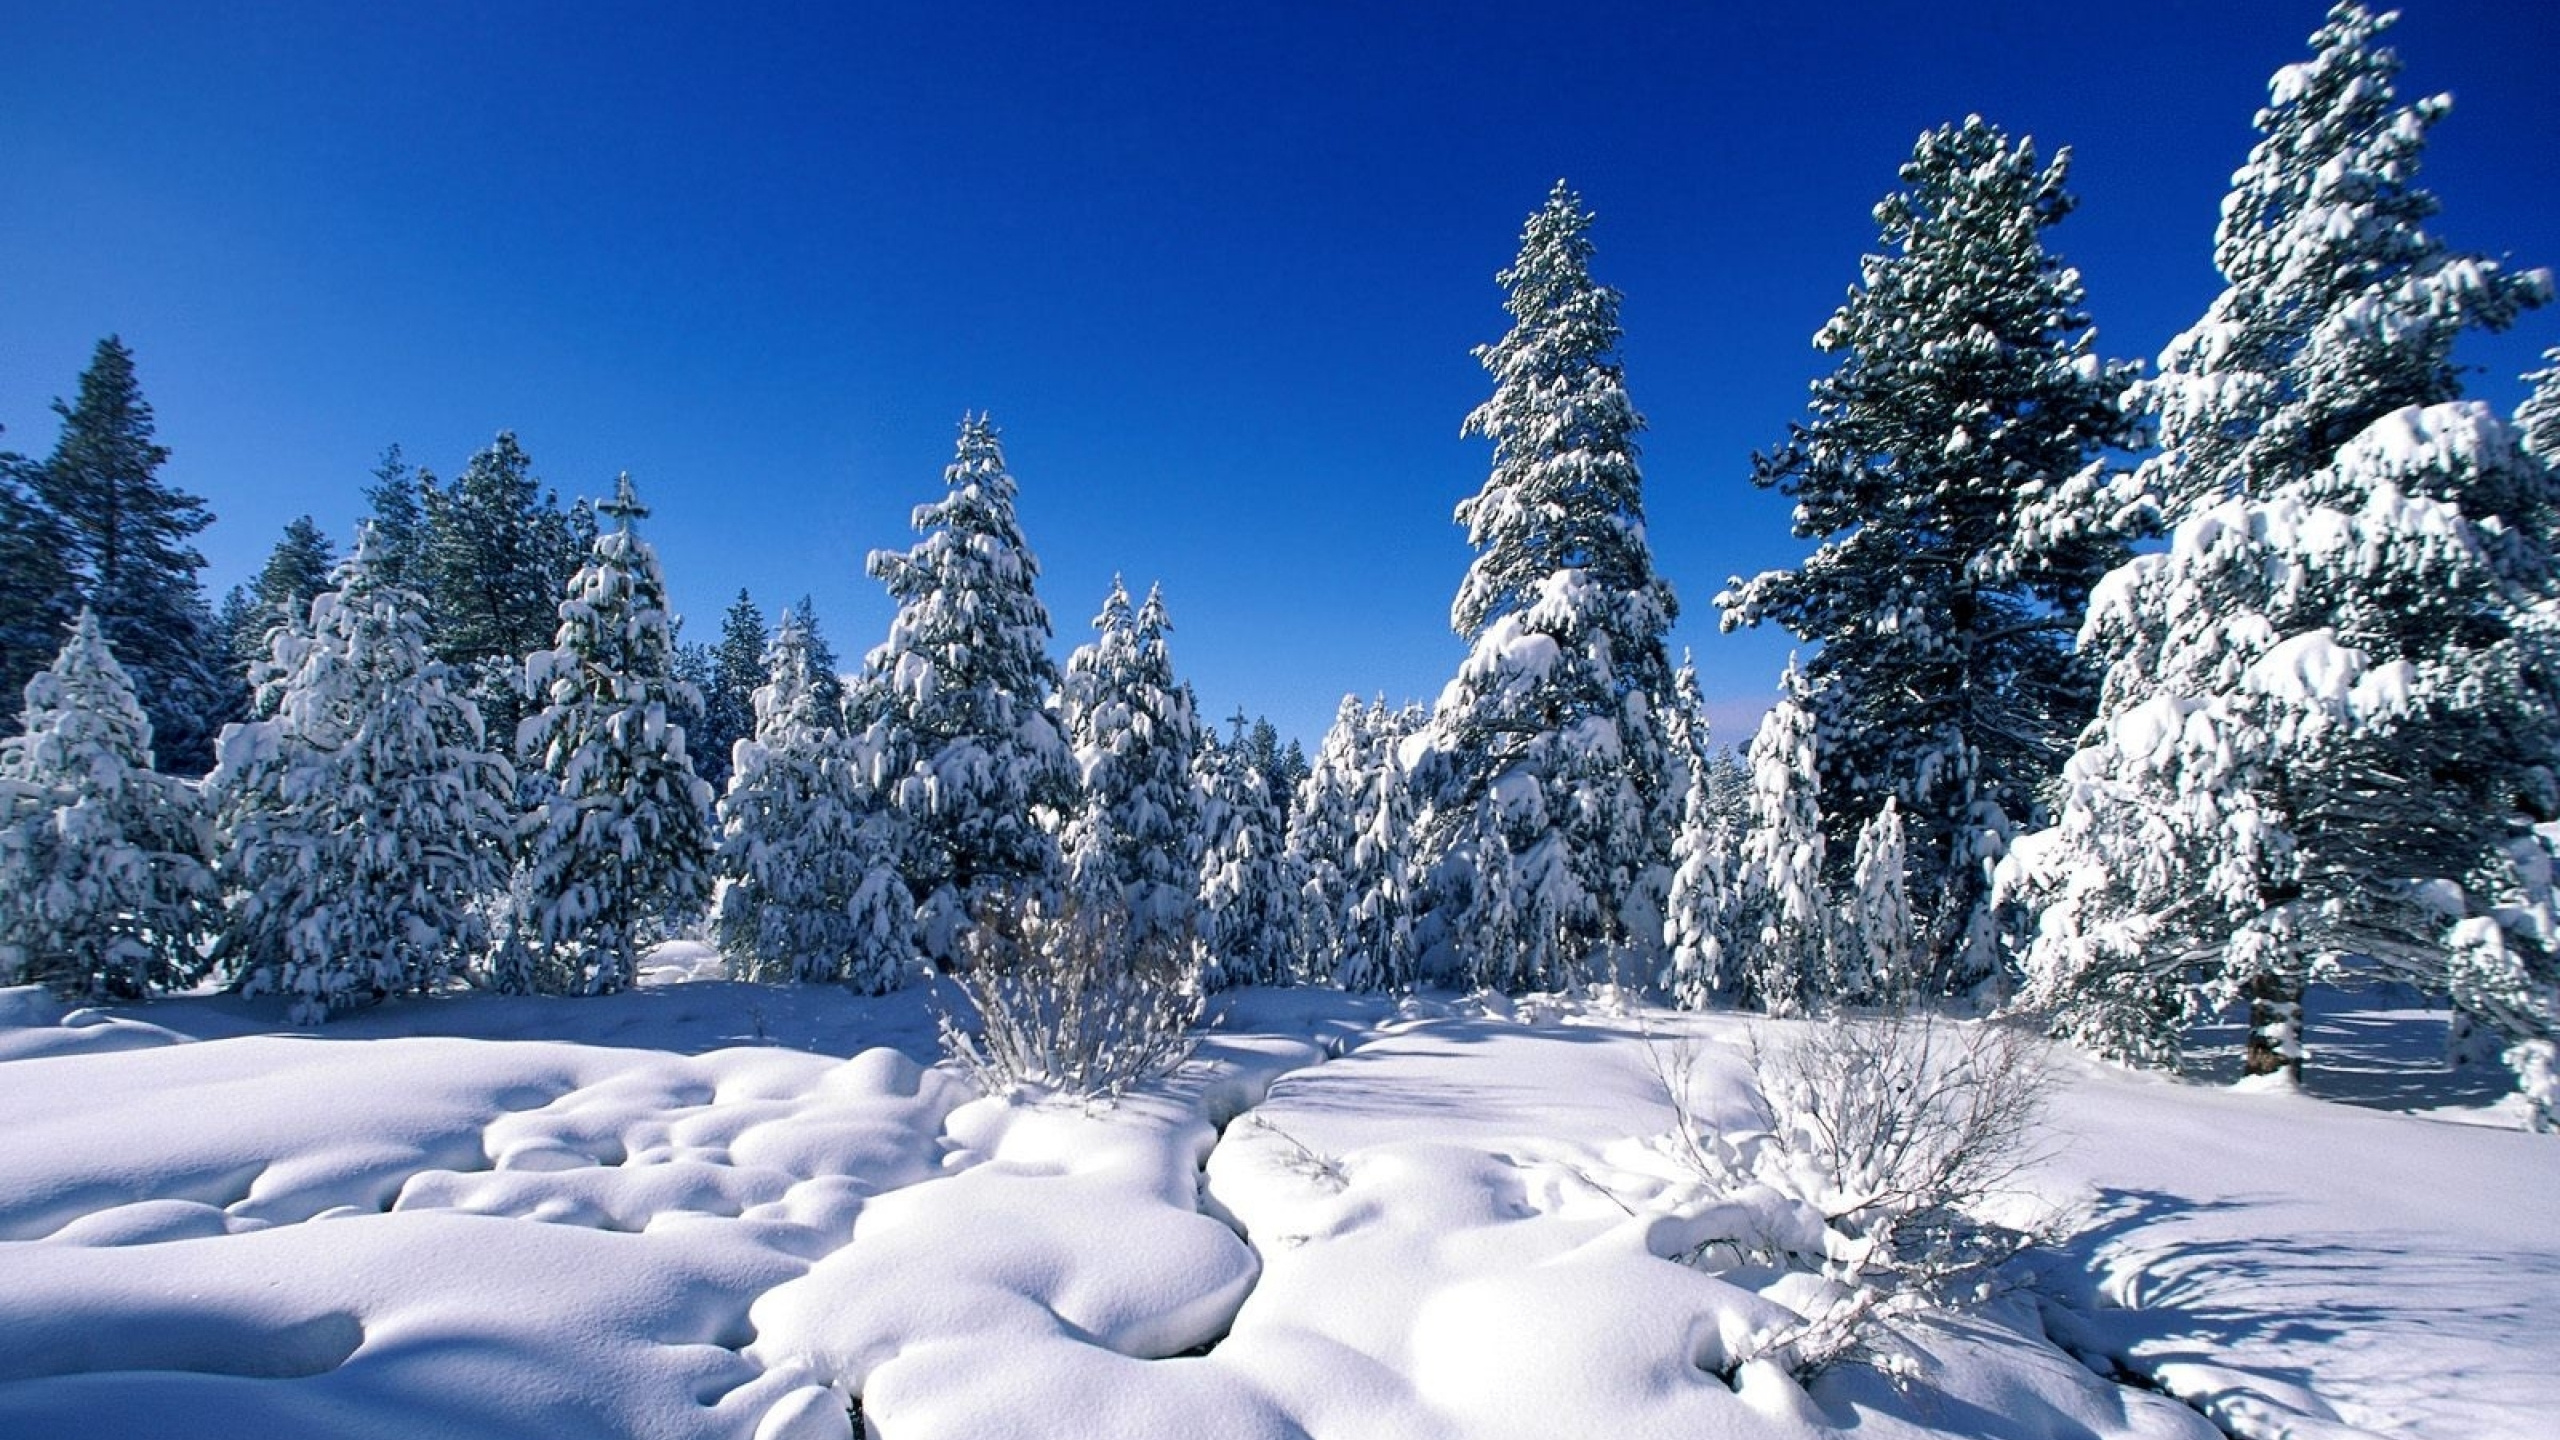 Snow Covered Trees Under Blue Sky During Daytime. Wallpaper in 2560x1440 Resolution